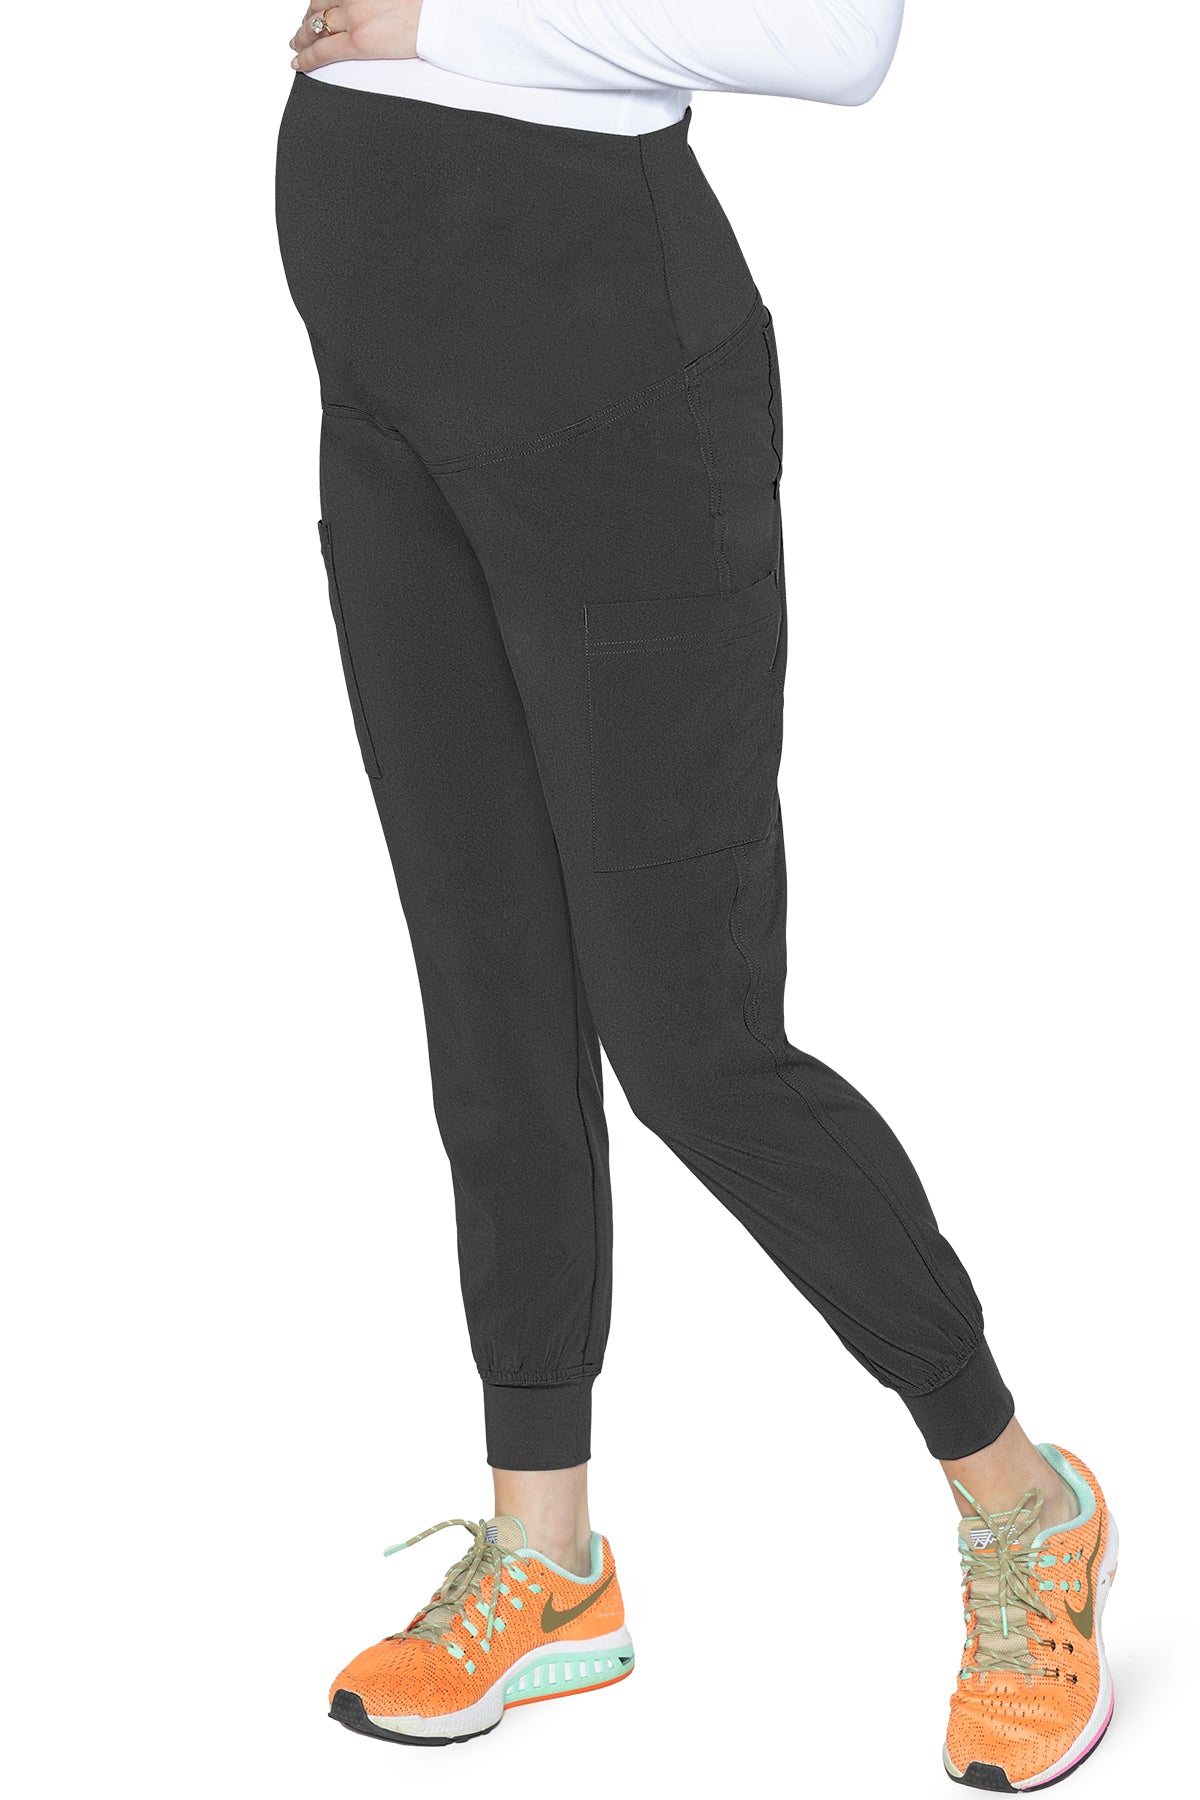 Med Couture Plus One 8729 Maternity Jogger Pant Black 